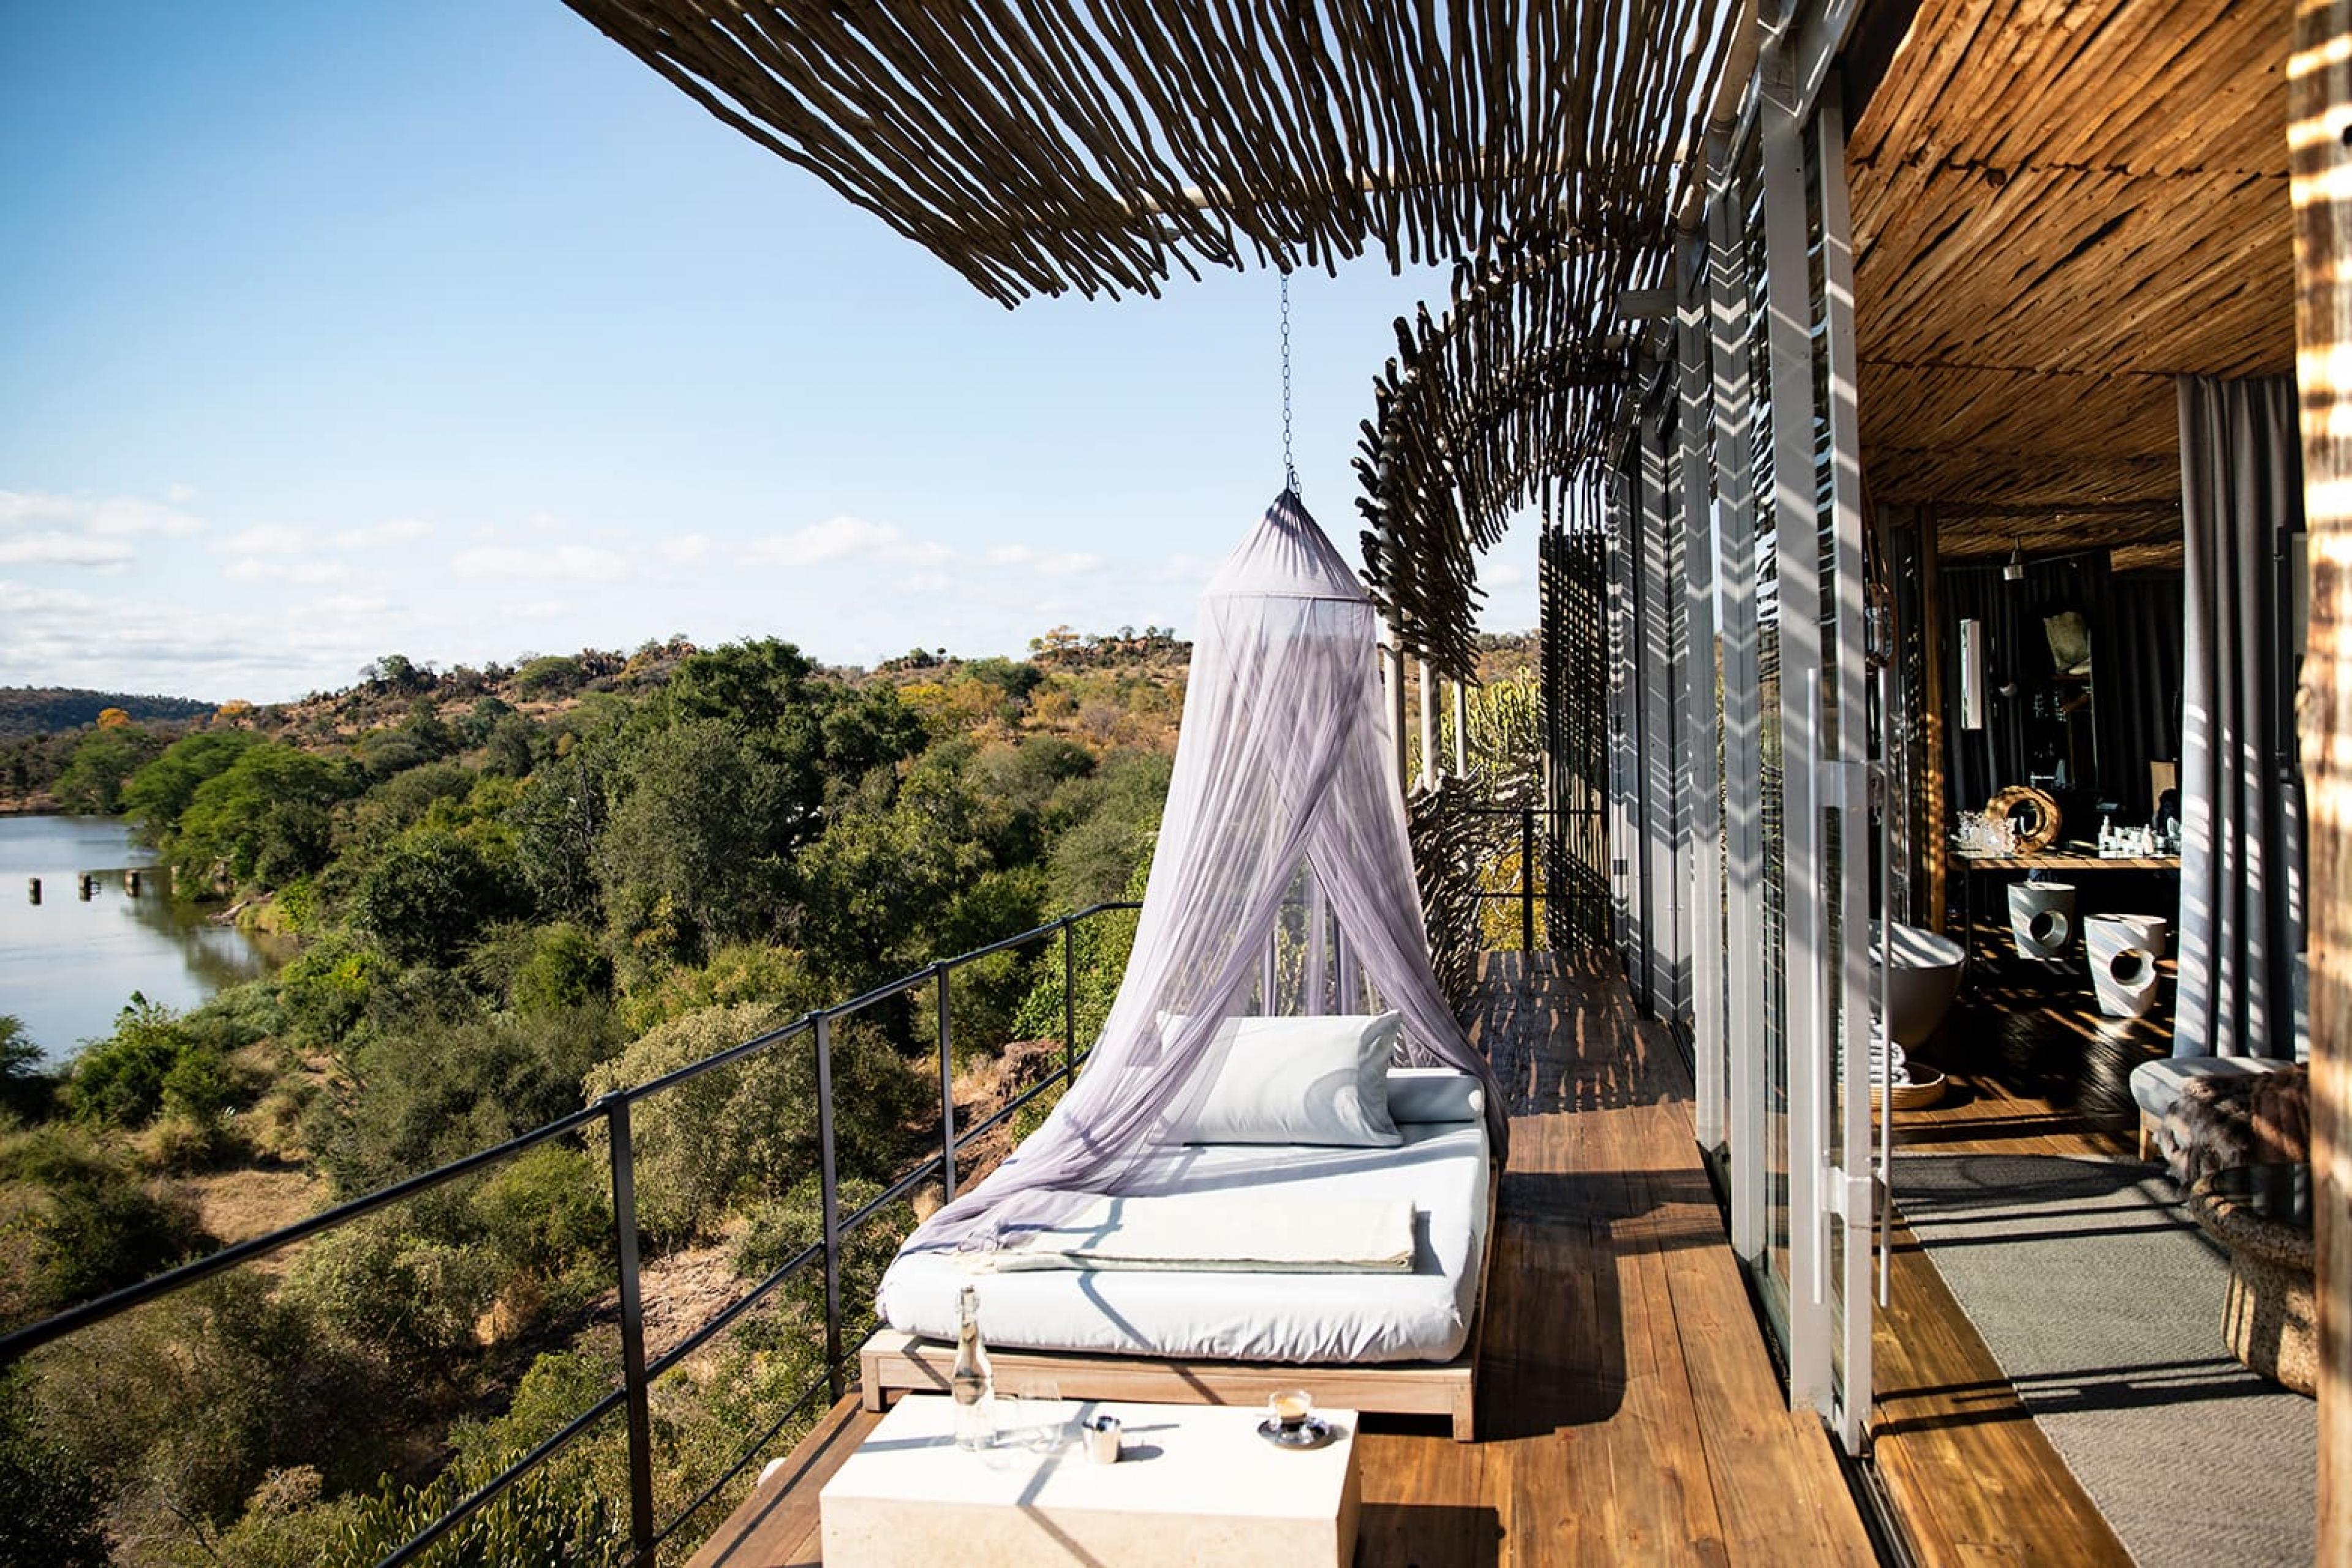 A bed on a balcony at daytime overlooking river